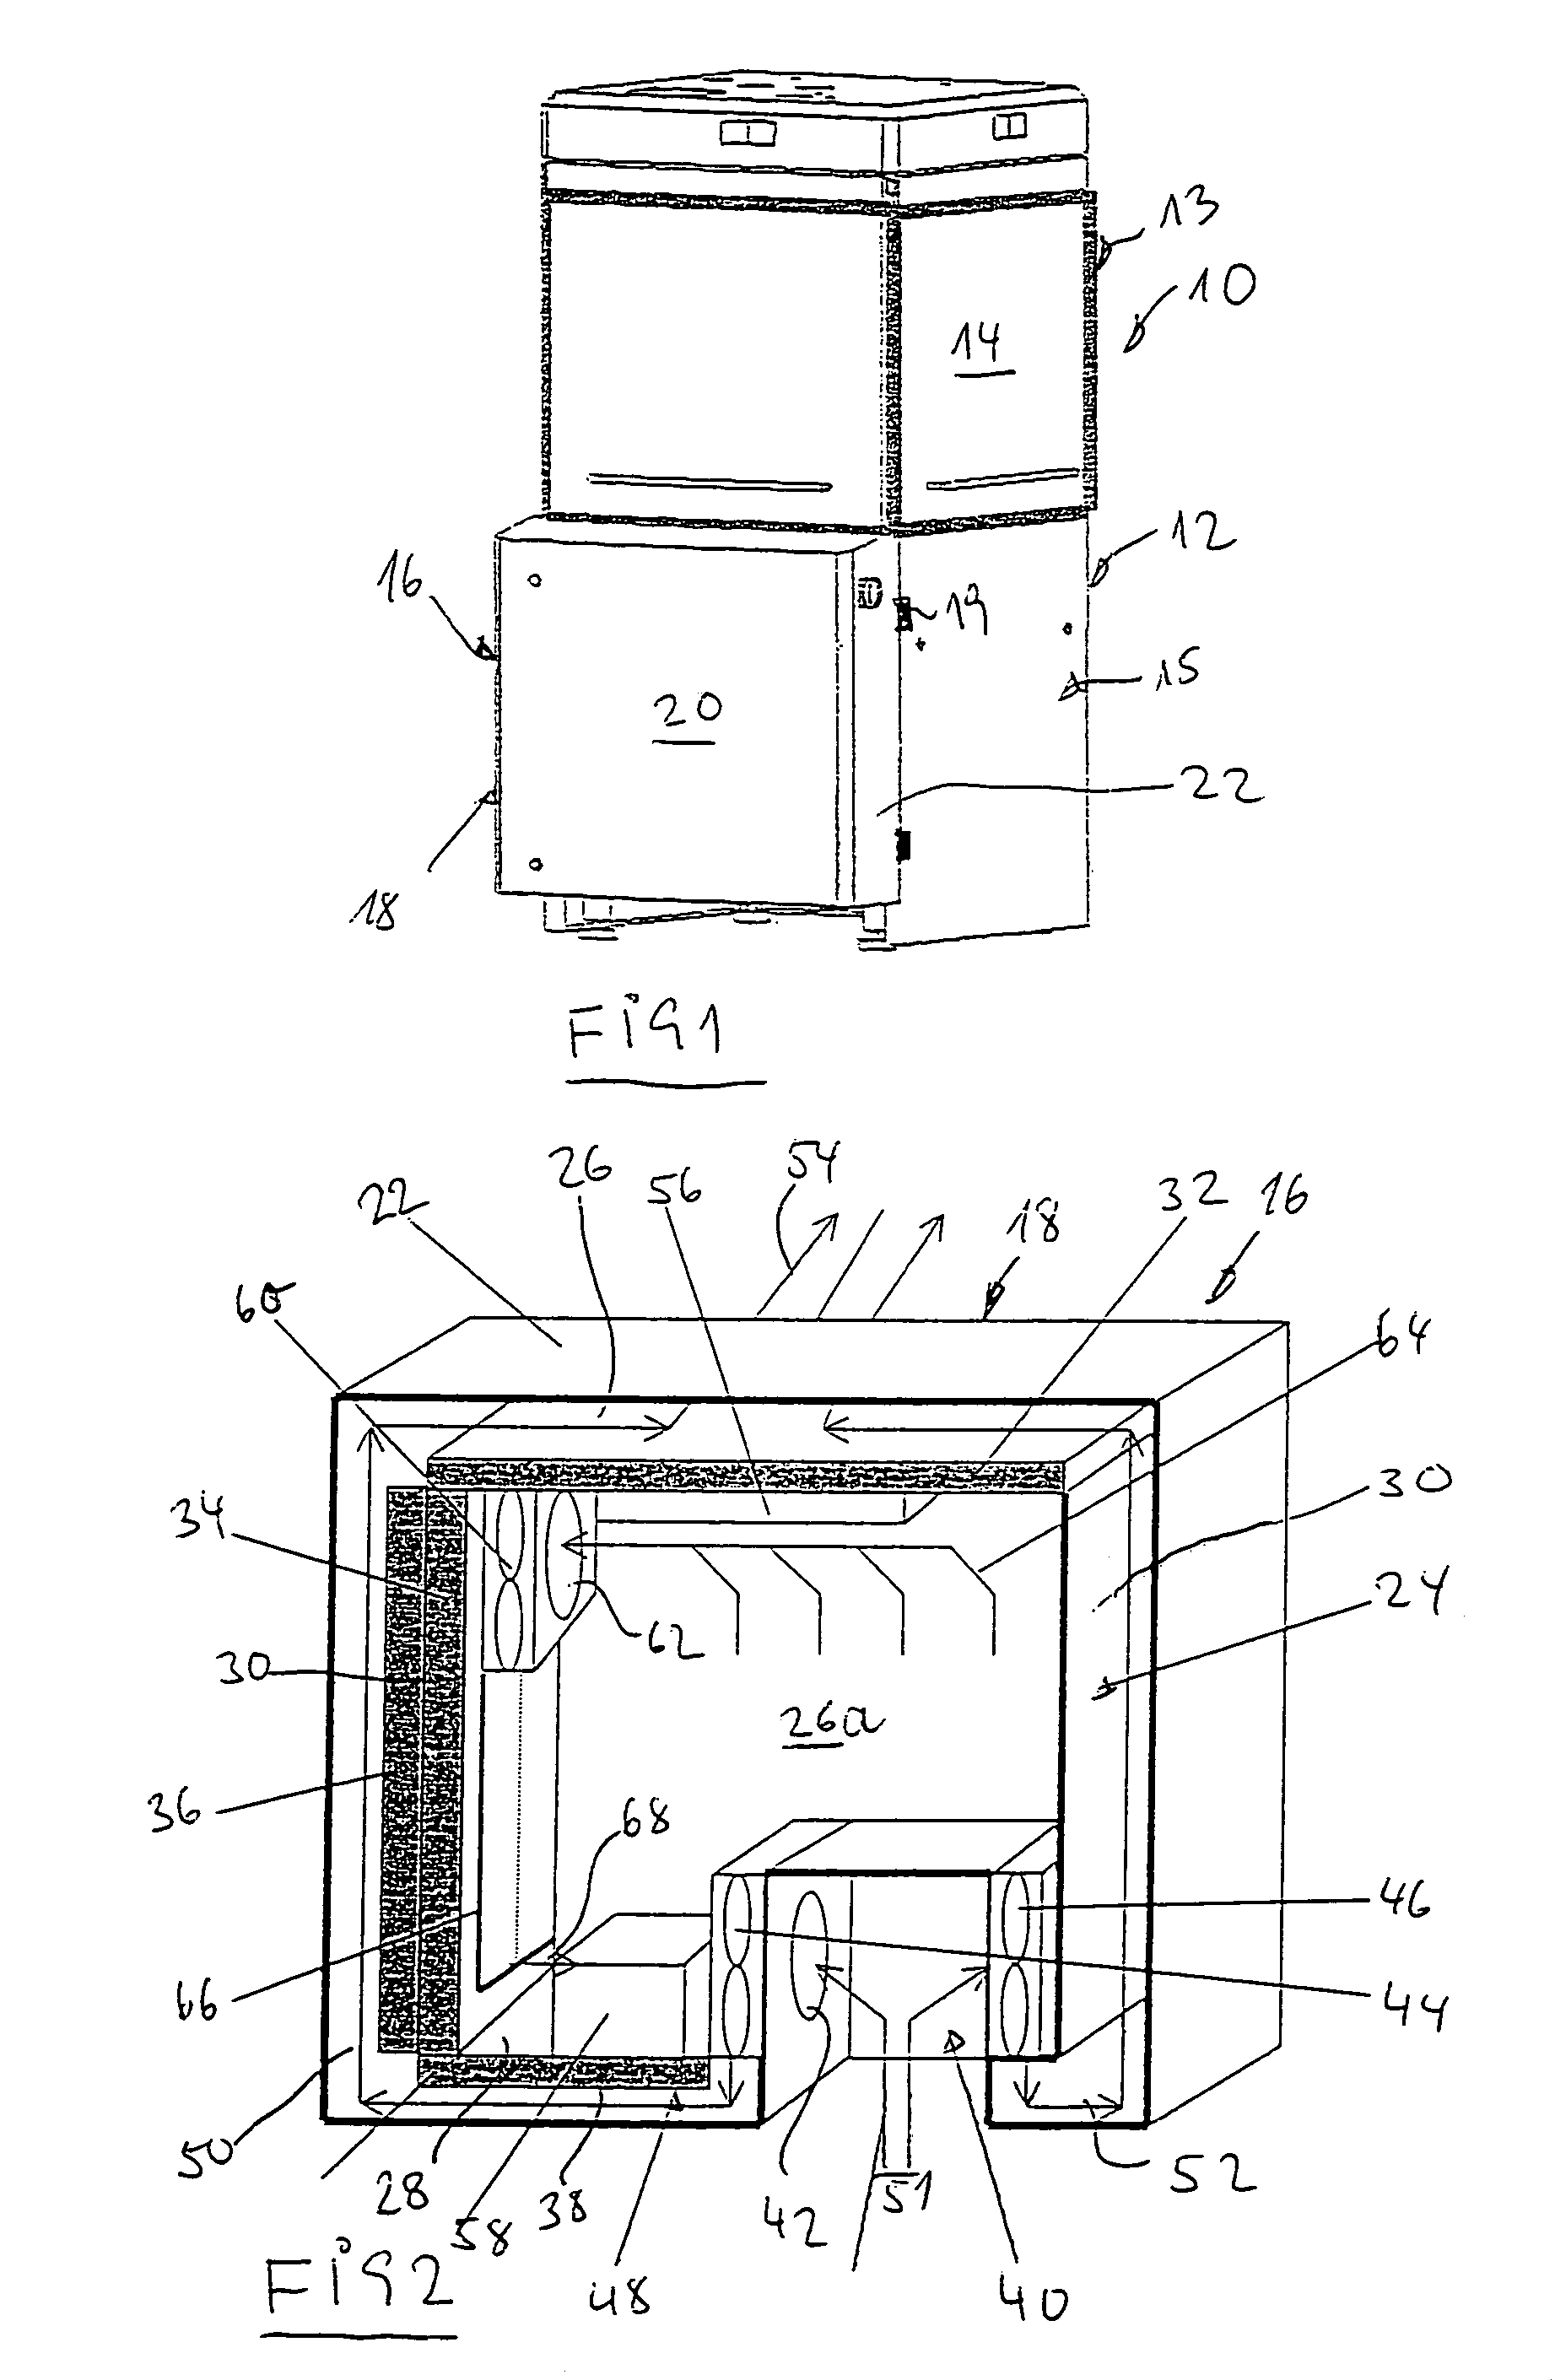 Switch cabinet for a tablet press